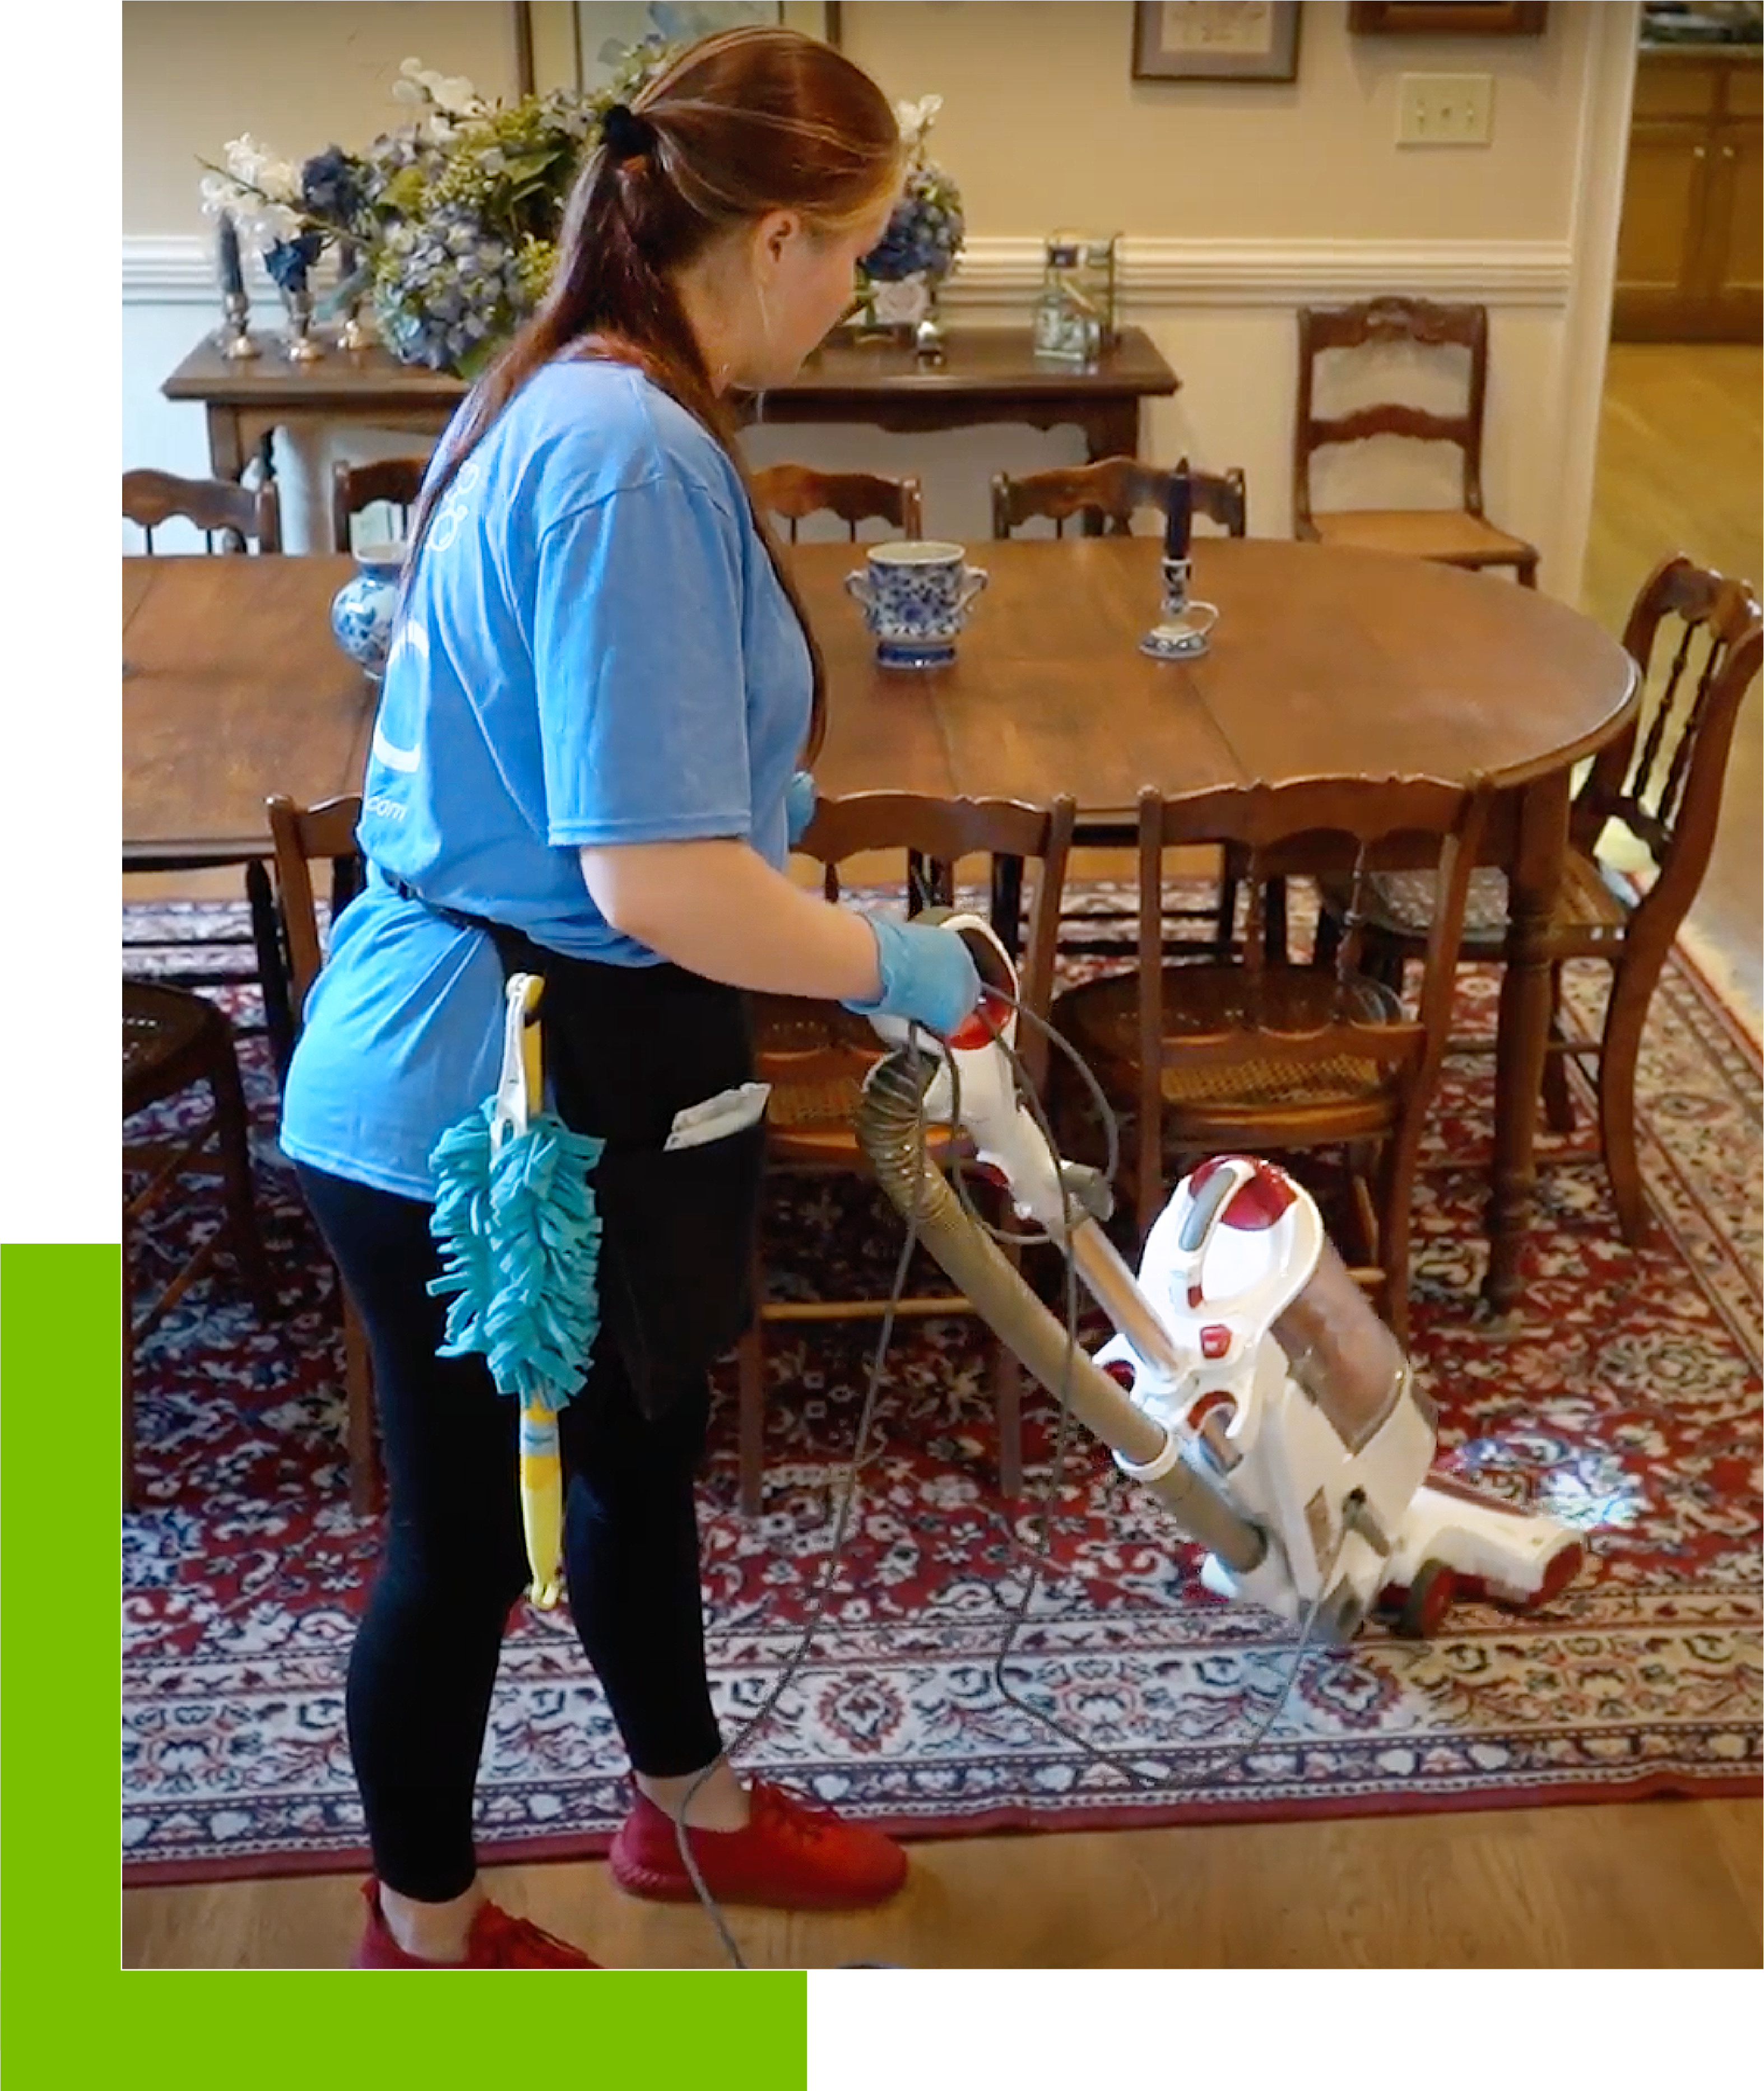 Looking for house cleaning services near me in Walnut Grove, GA?